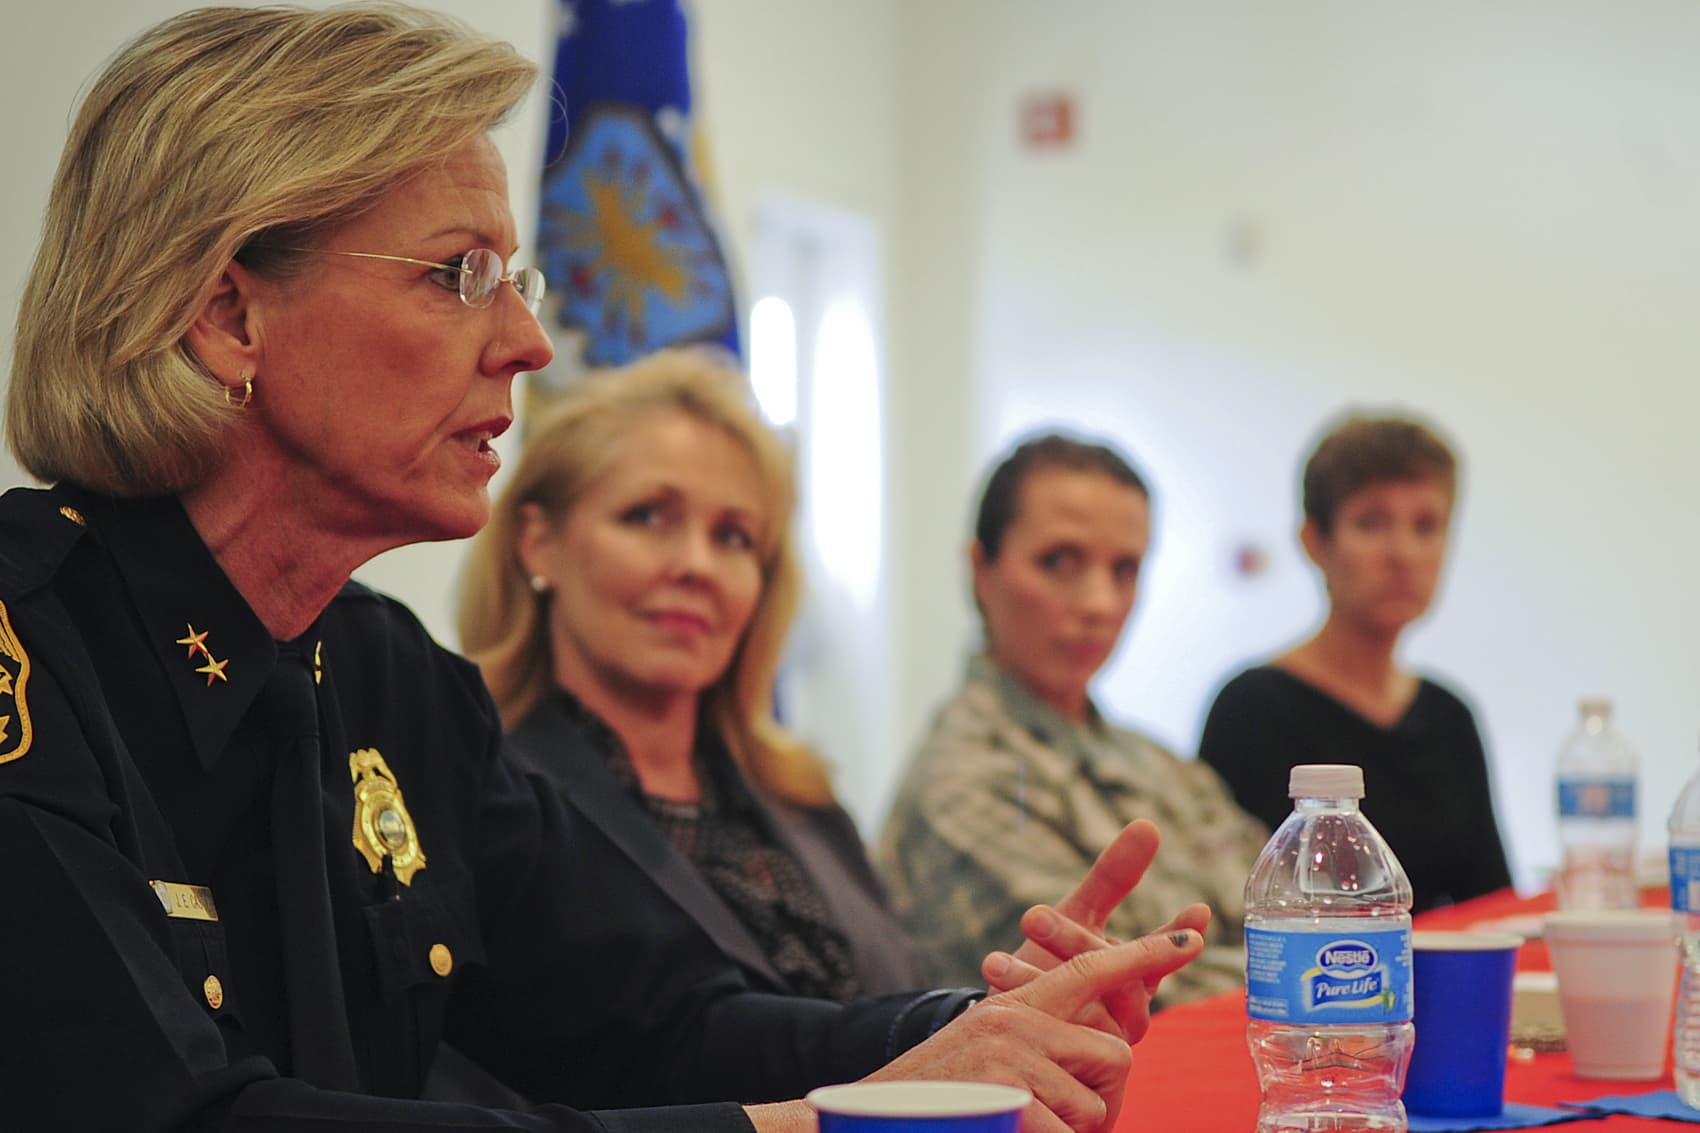 Jane Castor, former Tampa chief of police, answers questions from the audience during the Woman’s History Month panel held at the chapel on MacDill Air Force Base Fla., Mar. 23, 2012. (U.S. Air Force photo by Senior Airman Melissa V. Paradise)